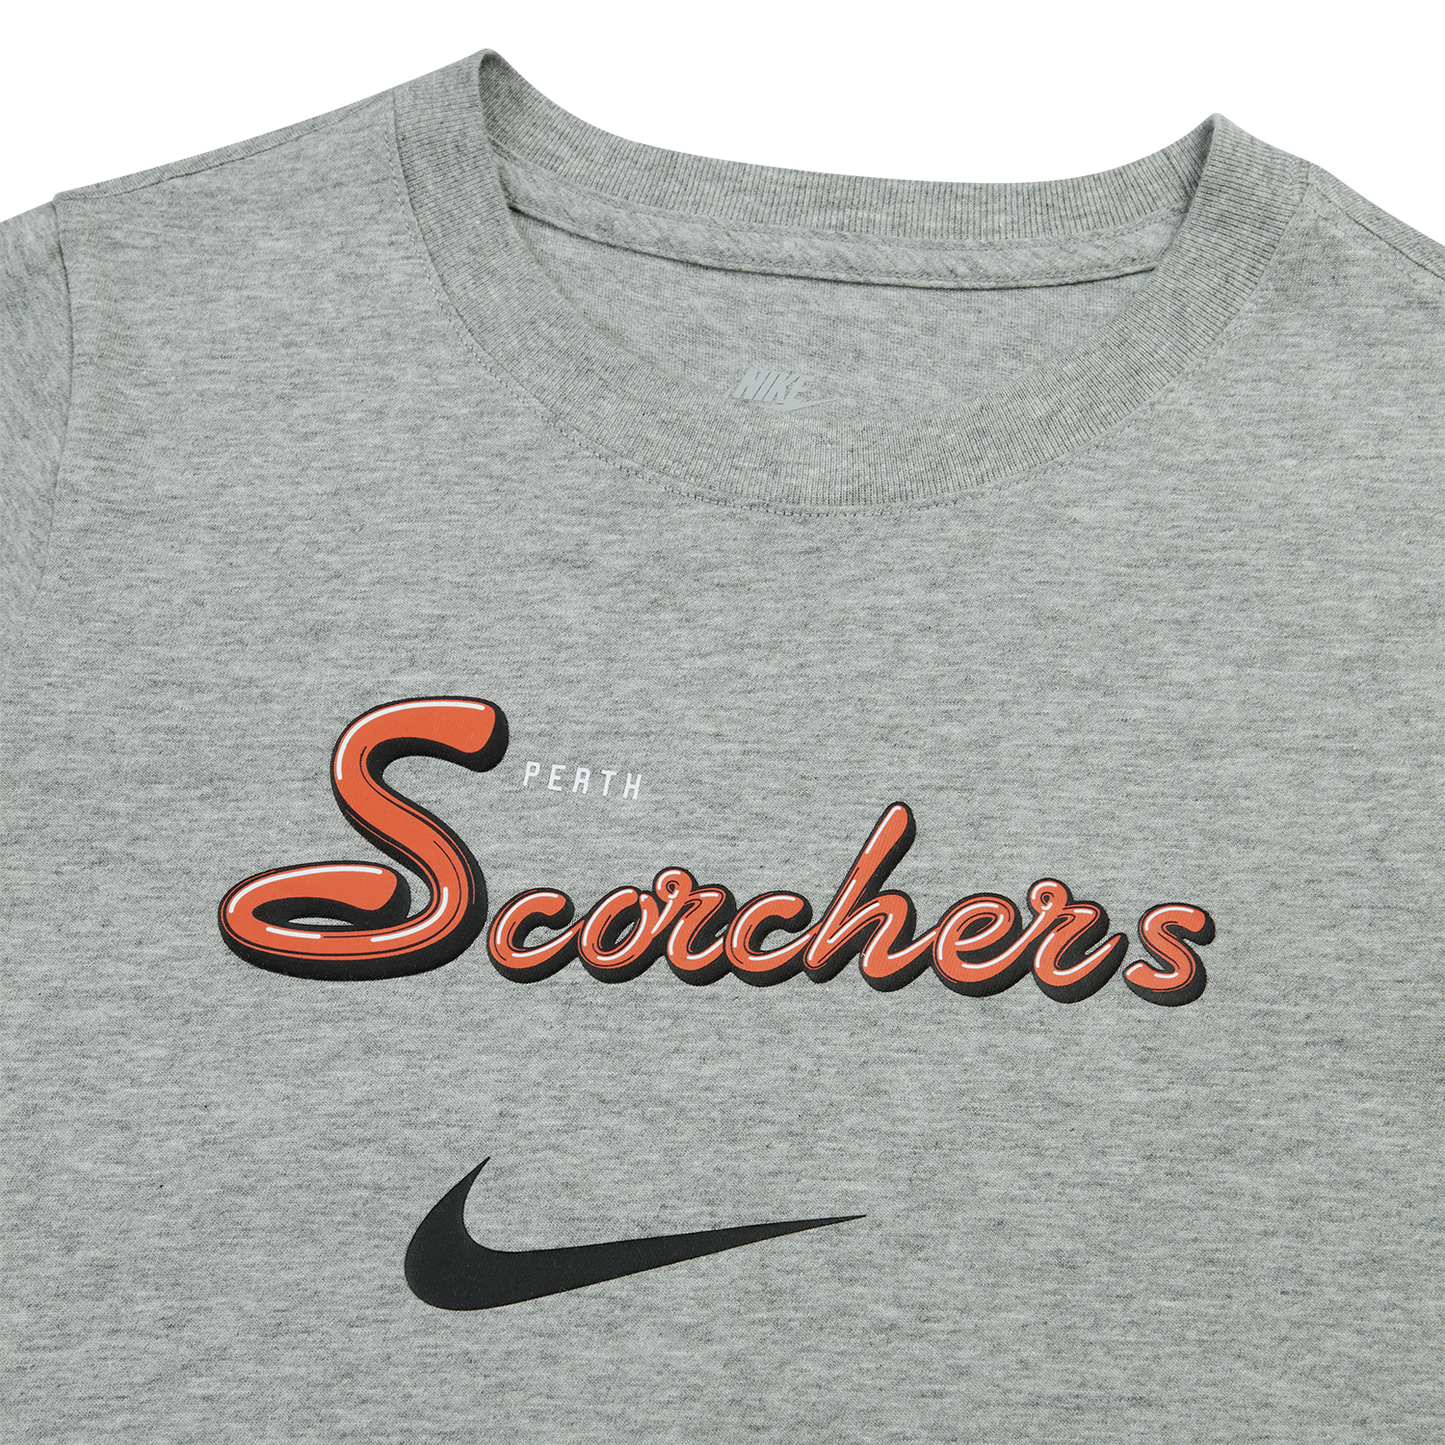 Perth Scorchers Youth Nike Bubble Graphic Tee